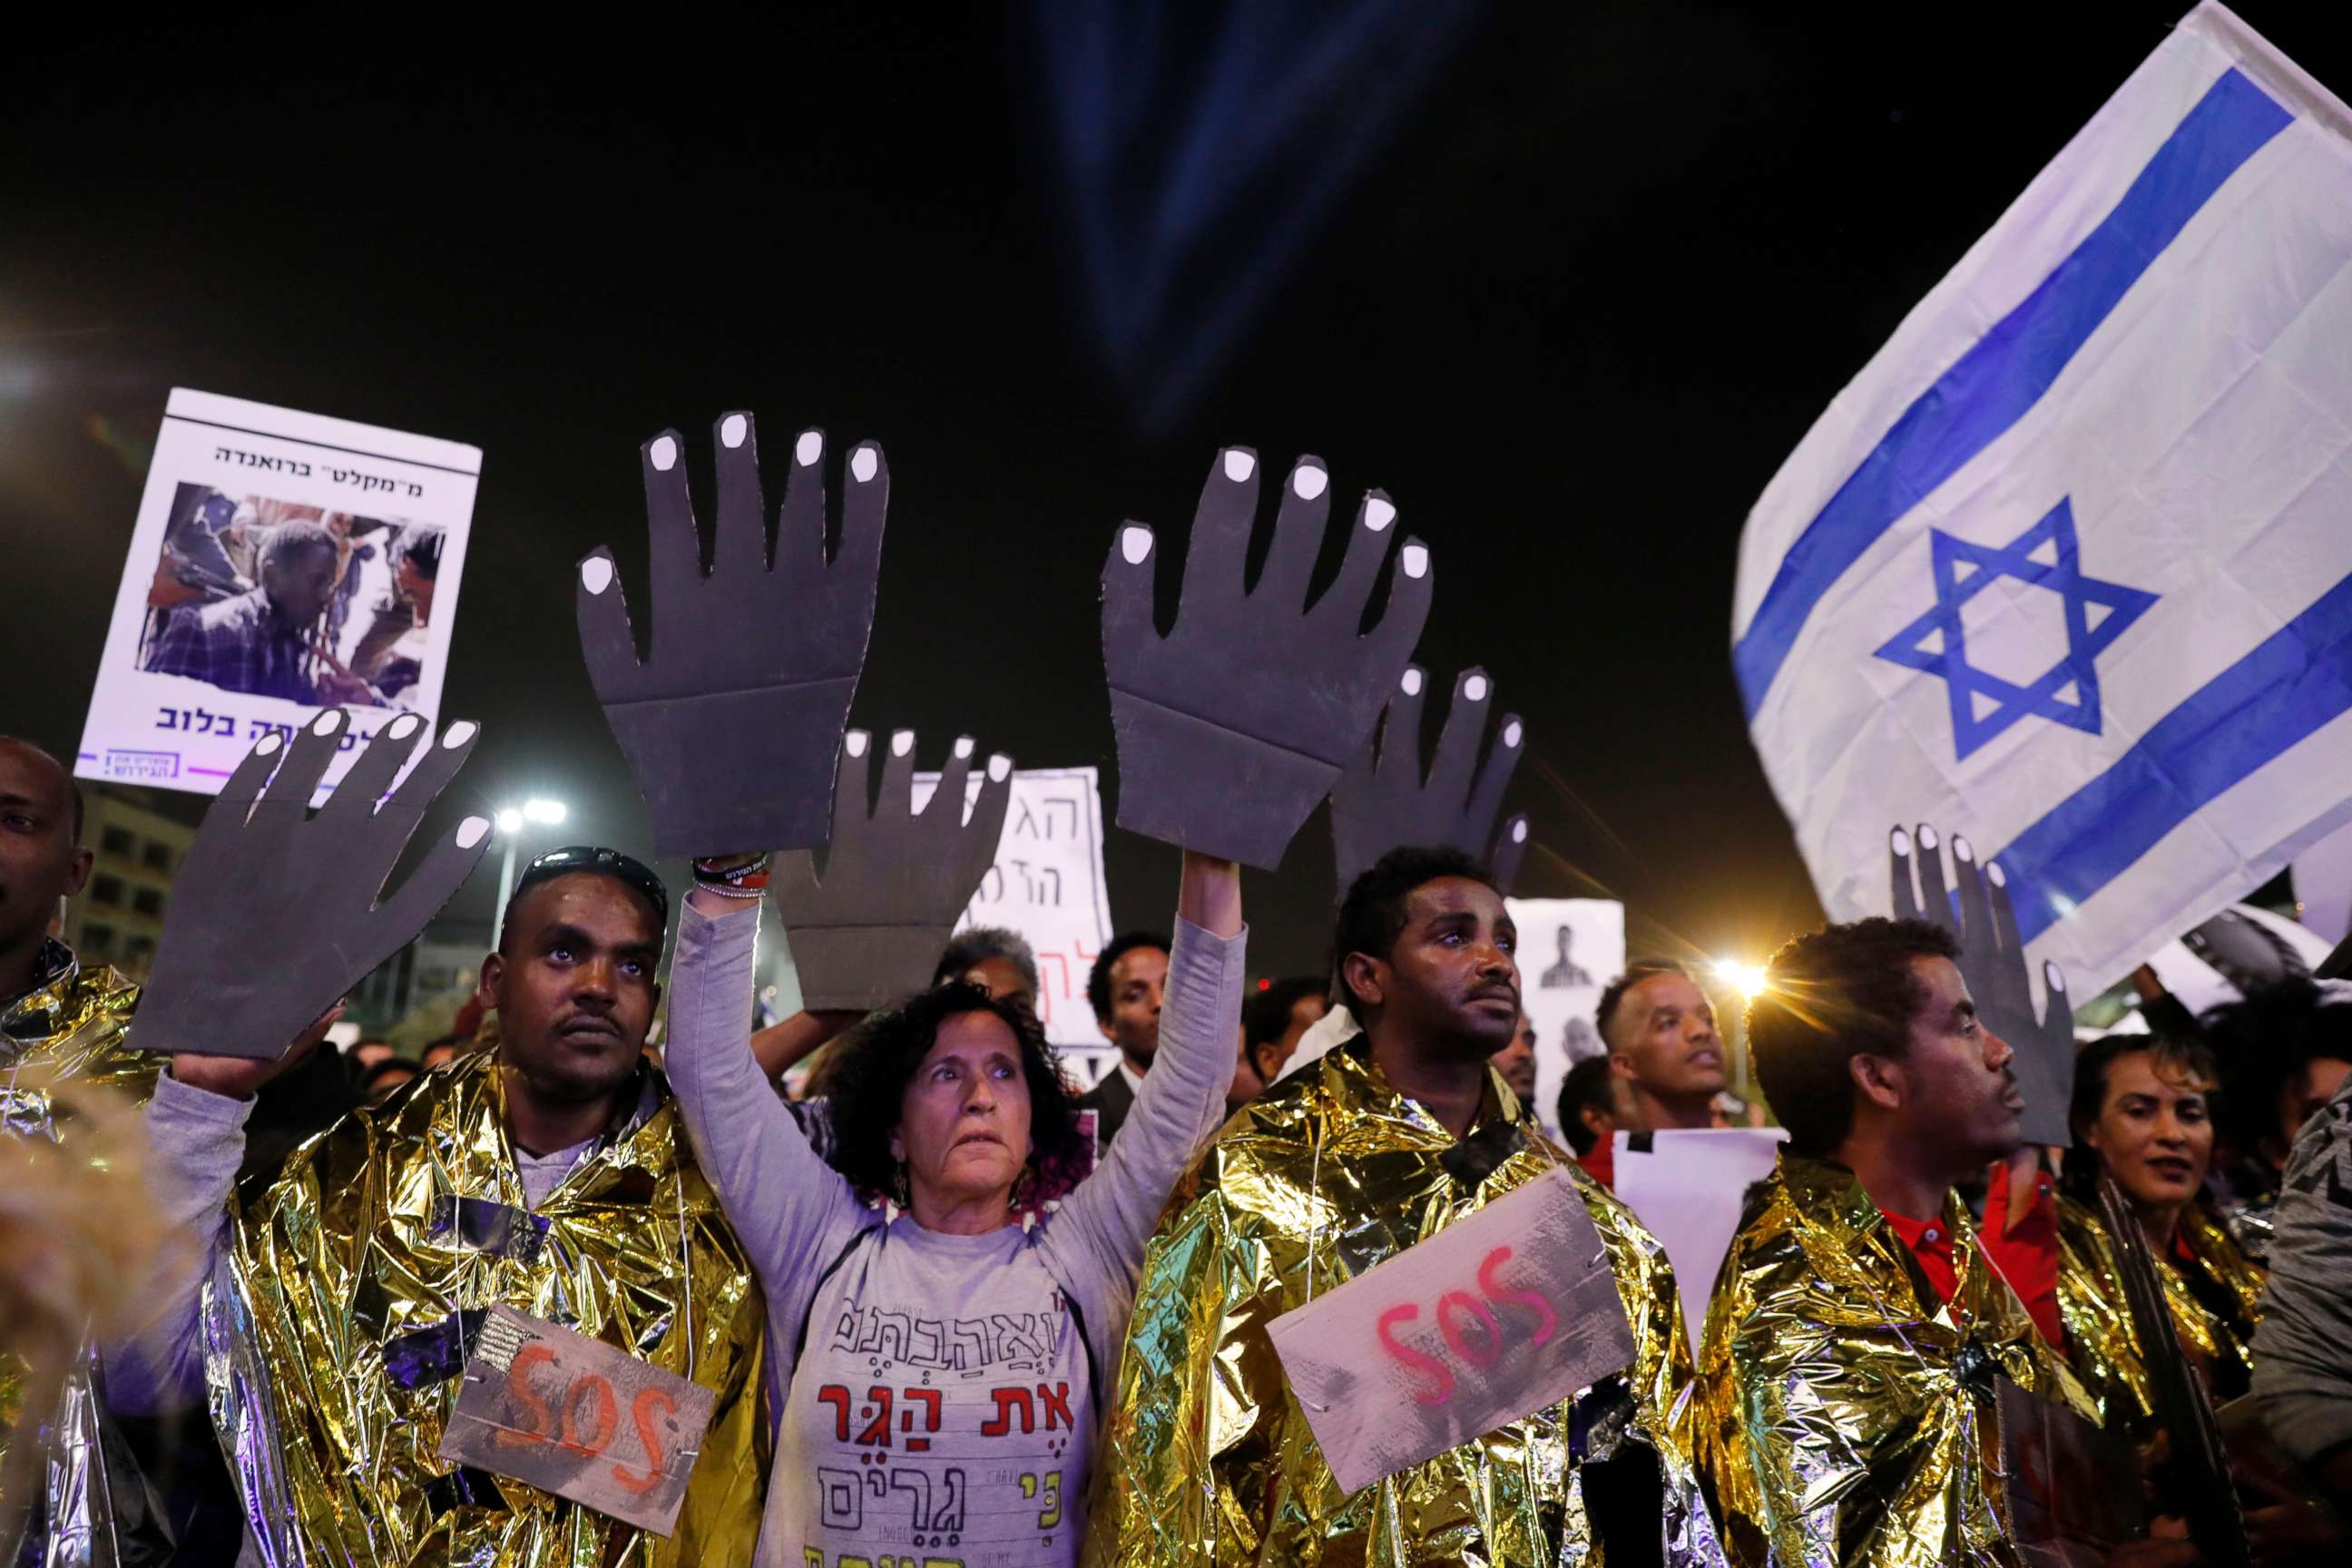 PHOTO: People protest against the deportation of African asylum seekers during a demonstration in Rabin square, Tel Aviv, Israel, March 24, 2018.